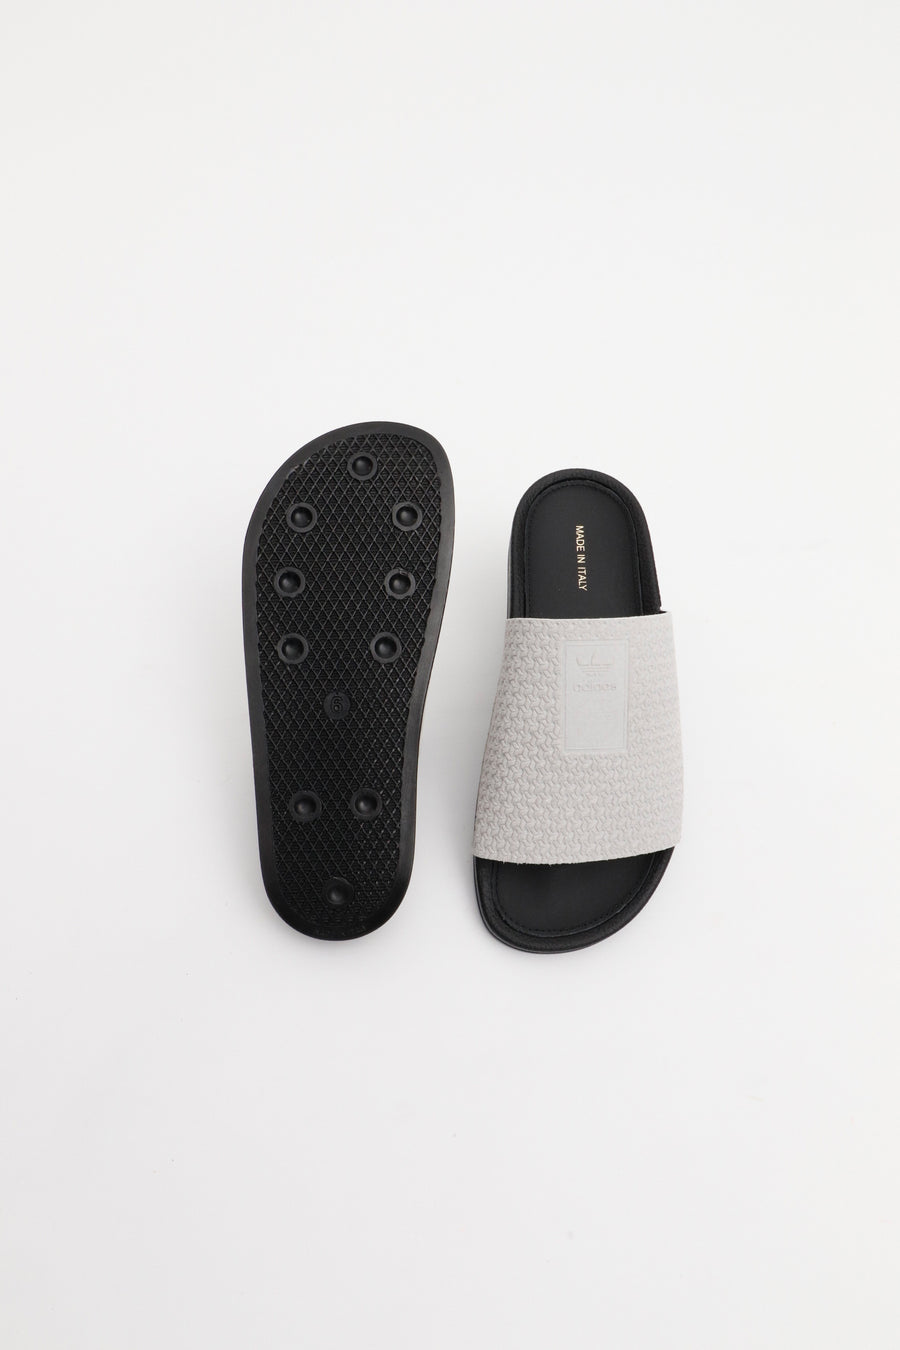 adidas luxe slides